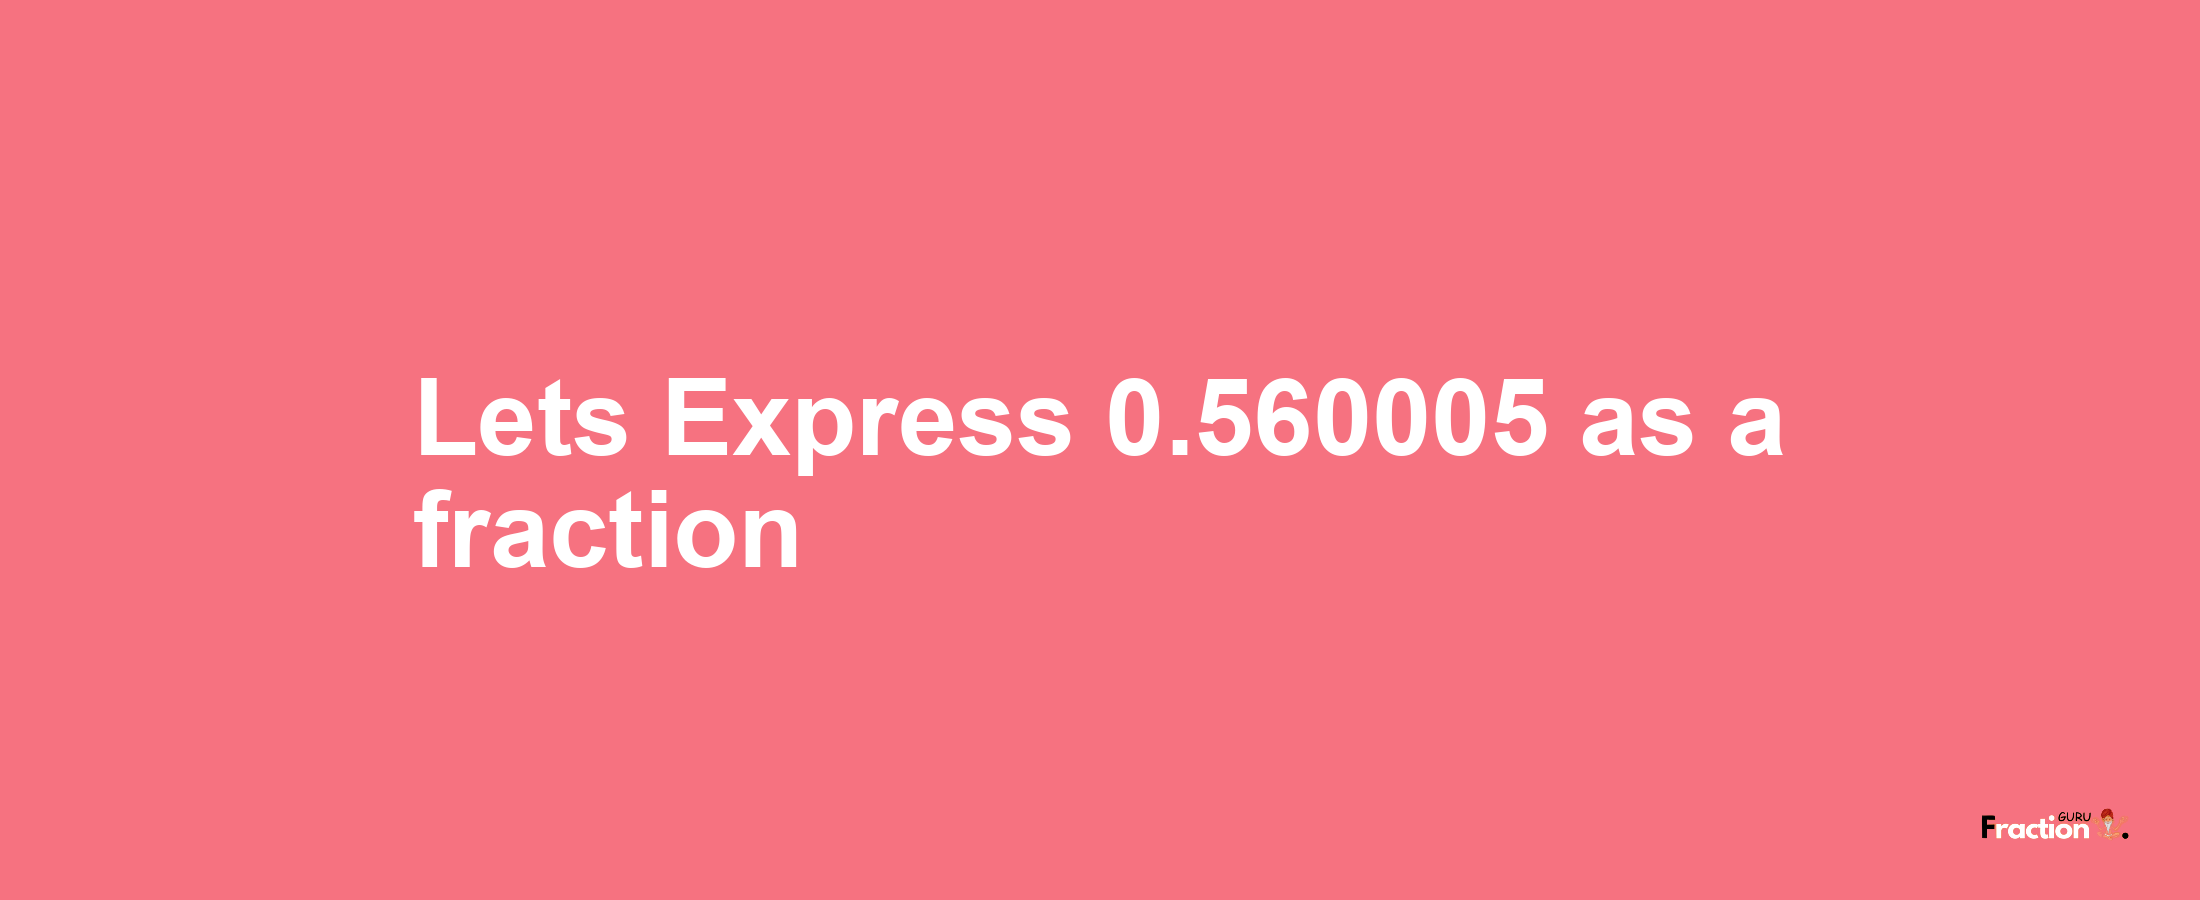 Lets Express 0.560005 as afraction